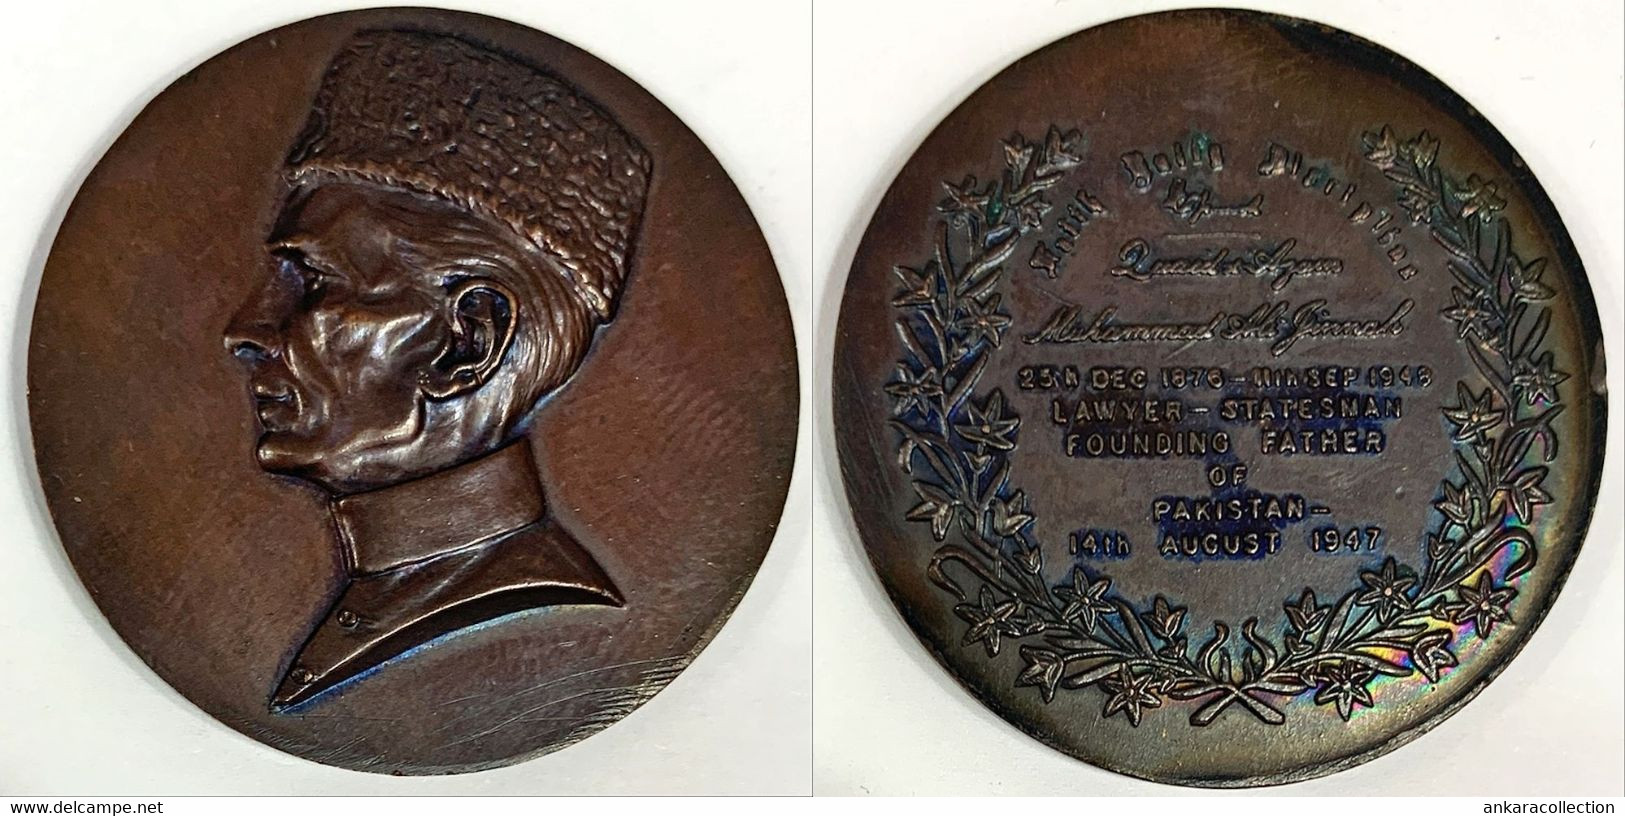 AC - MUHAMMAD ALI JINNAH FOUNDING FATHER OF PAKISTAN 14th AUGUST 1947 MEDAL - MEDALLION - Royal / Of Nobility